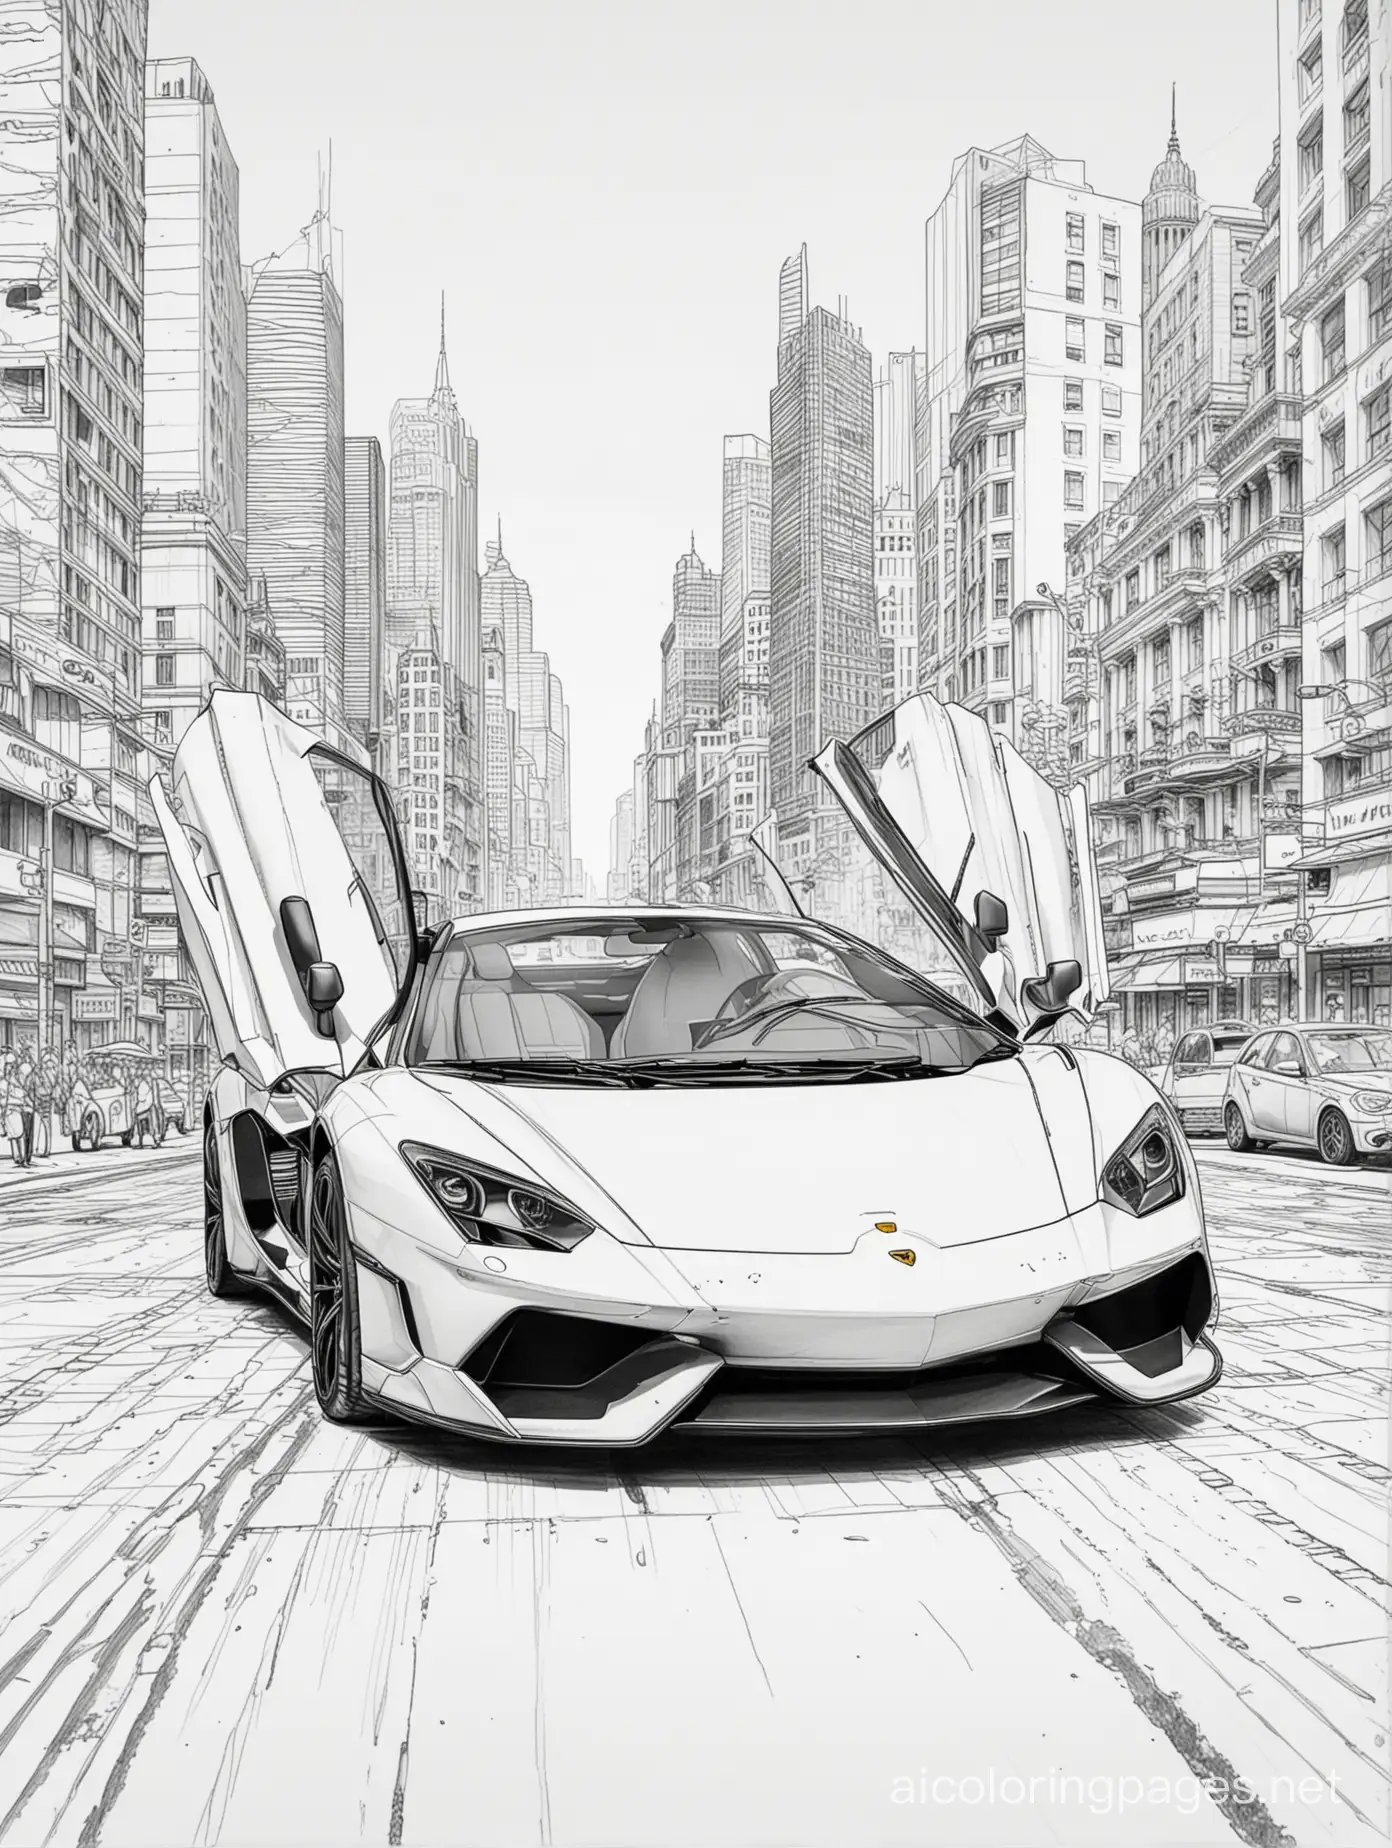 big city, mclaren, lamborghini, Coloring Page, black and white, line art, white background, Simplicity, Ample White Space. The background of the coloring page is plain white to make it easy for young children to color within the lines. The outlines of all the subjects are easy to distinguish, making it simple for kids to color without too much difficulty